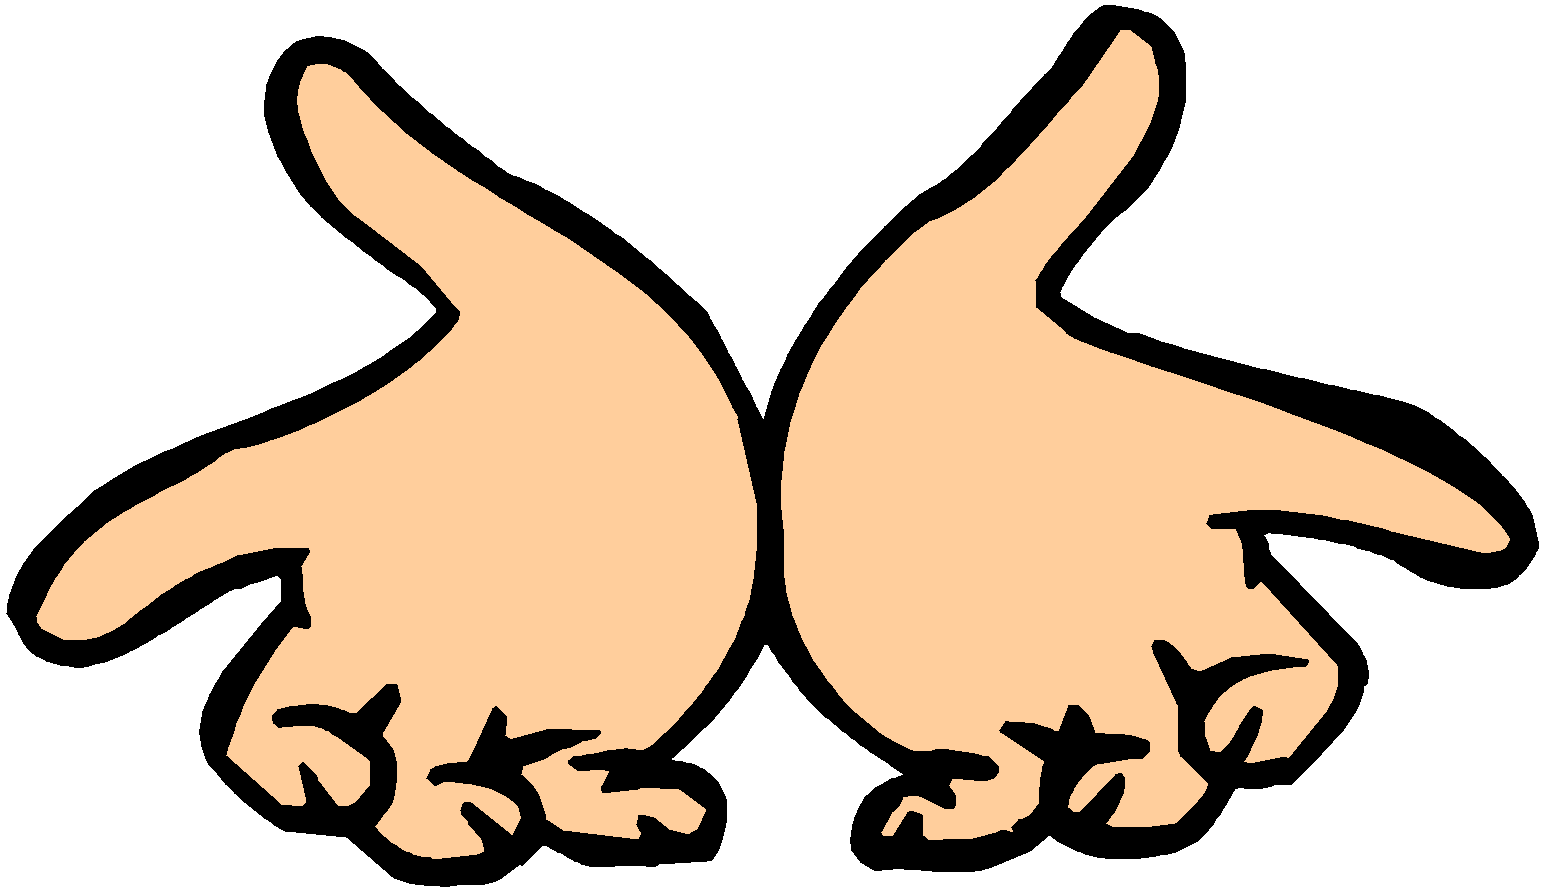 Animated Hands drawing free image download